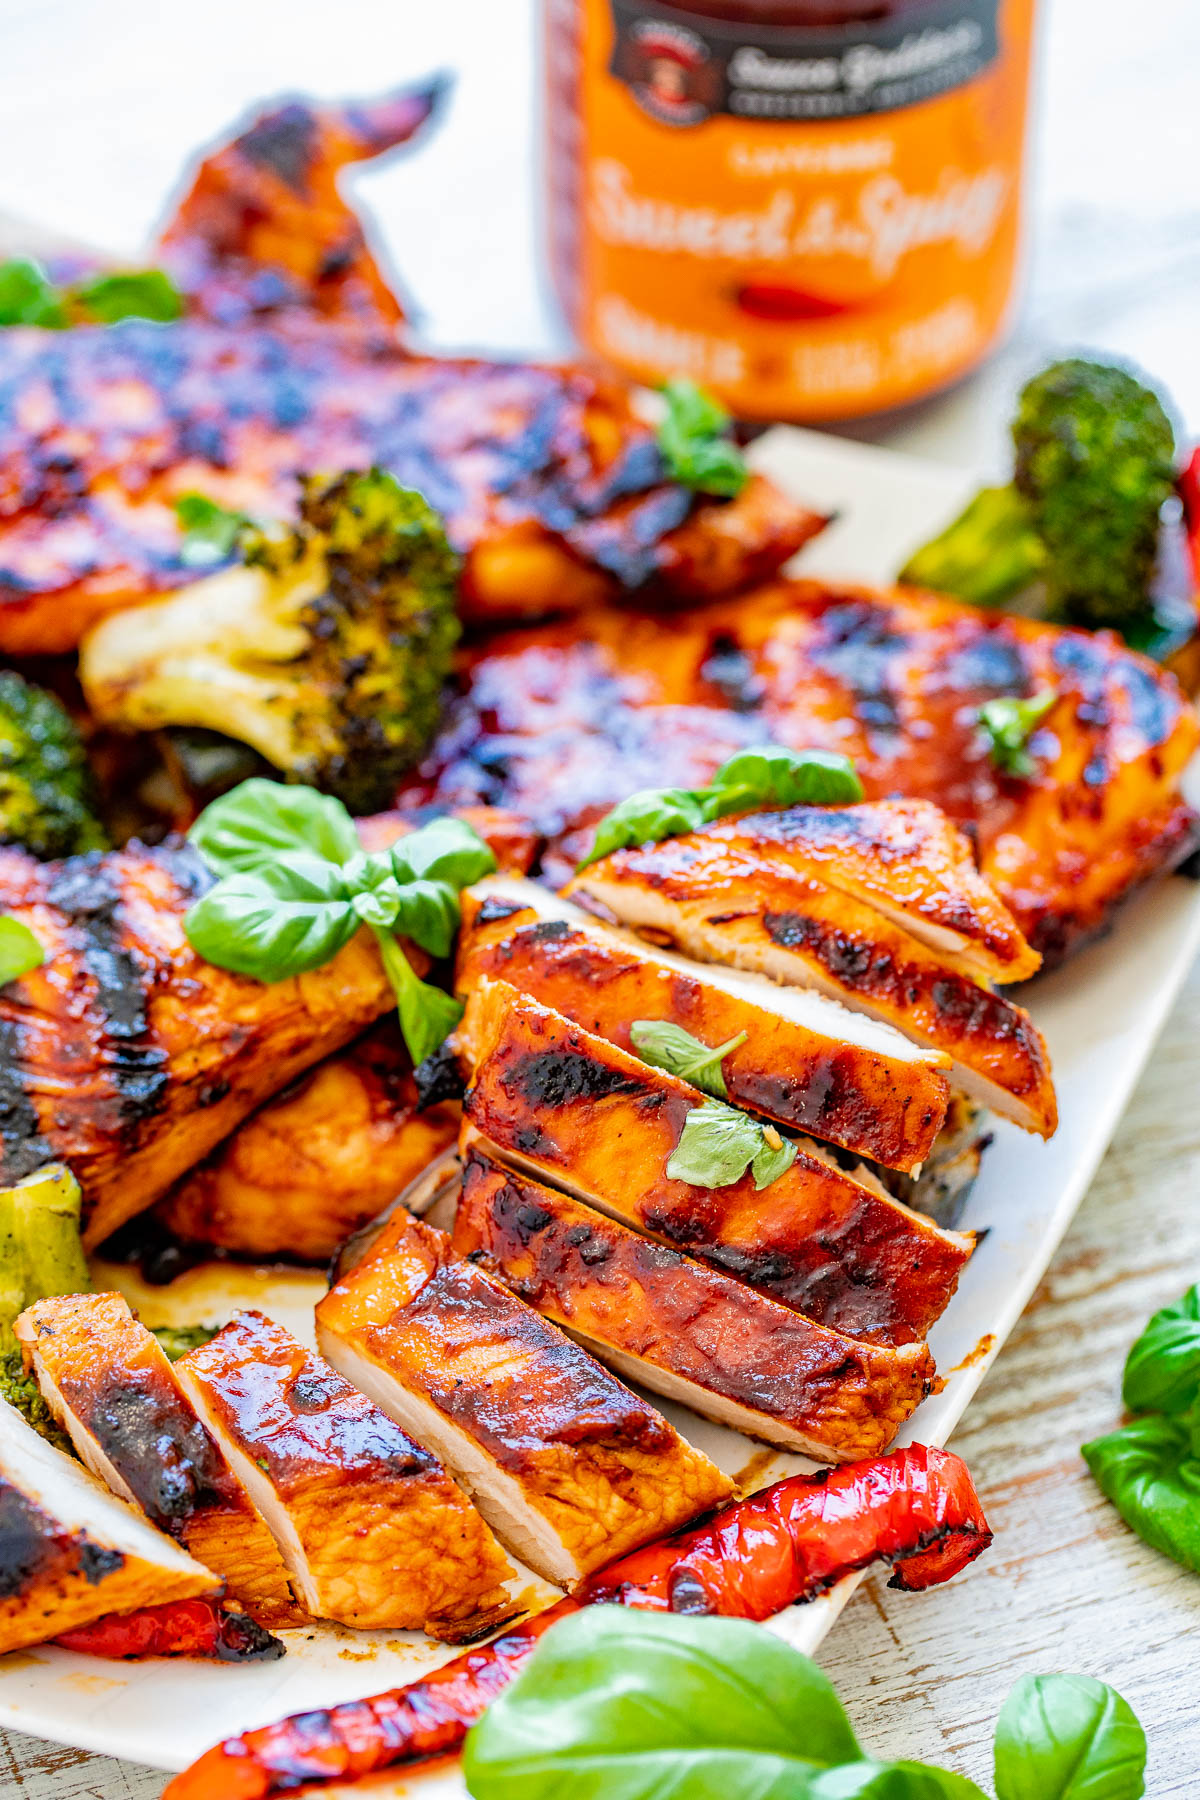 Grilled Sweet and Spicy Basil Chicken - EASY, amazing, PERFECTLY grilled chicken that's sweet-and-spicy with tons of FRESH basil flavor! Learn how to make the BEST grilled chicken and serve it with a side of lightly charred grilled vegetables! Perfect for summer barbecues, picnics, potlucks, and grilling season! 